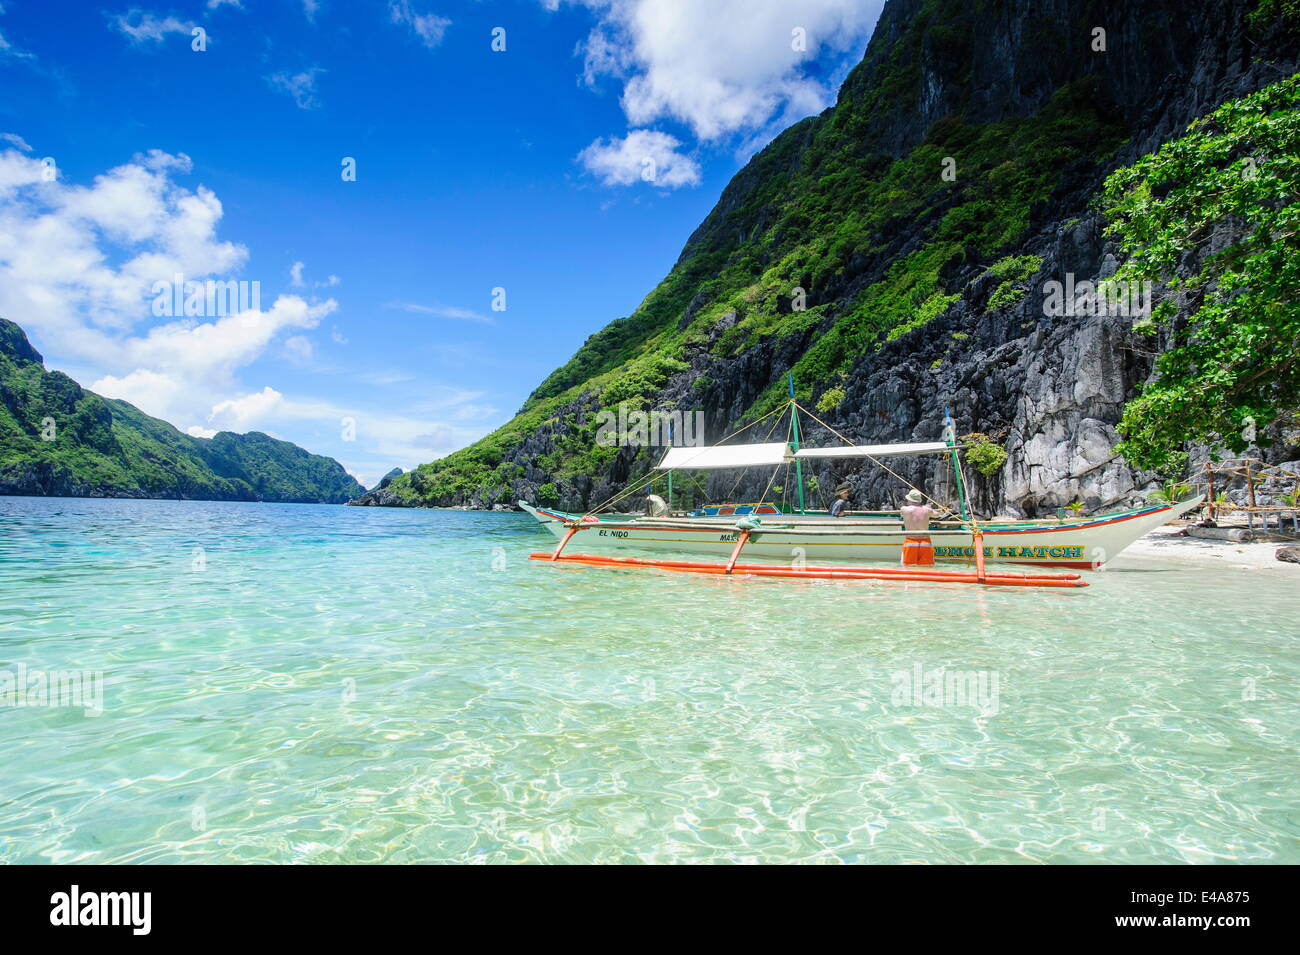 Outrigger boat in the crystal clear water in the Bacuit archipelago, Palawan, Philippines, Southeast Asia, Asia Stock Photo